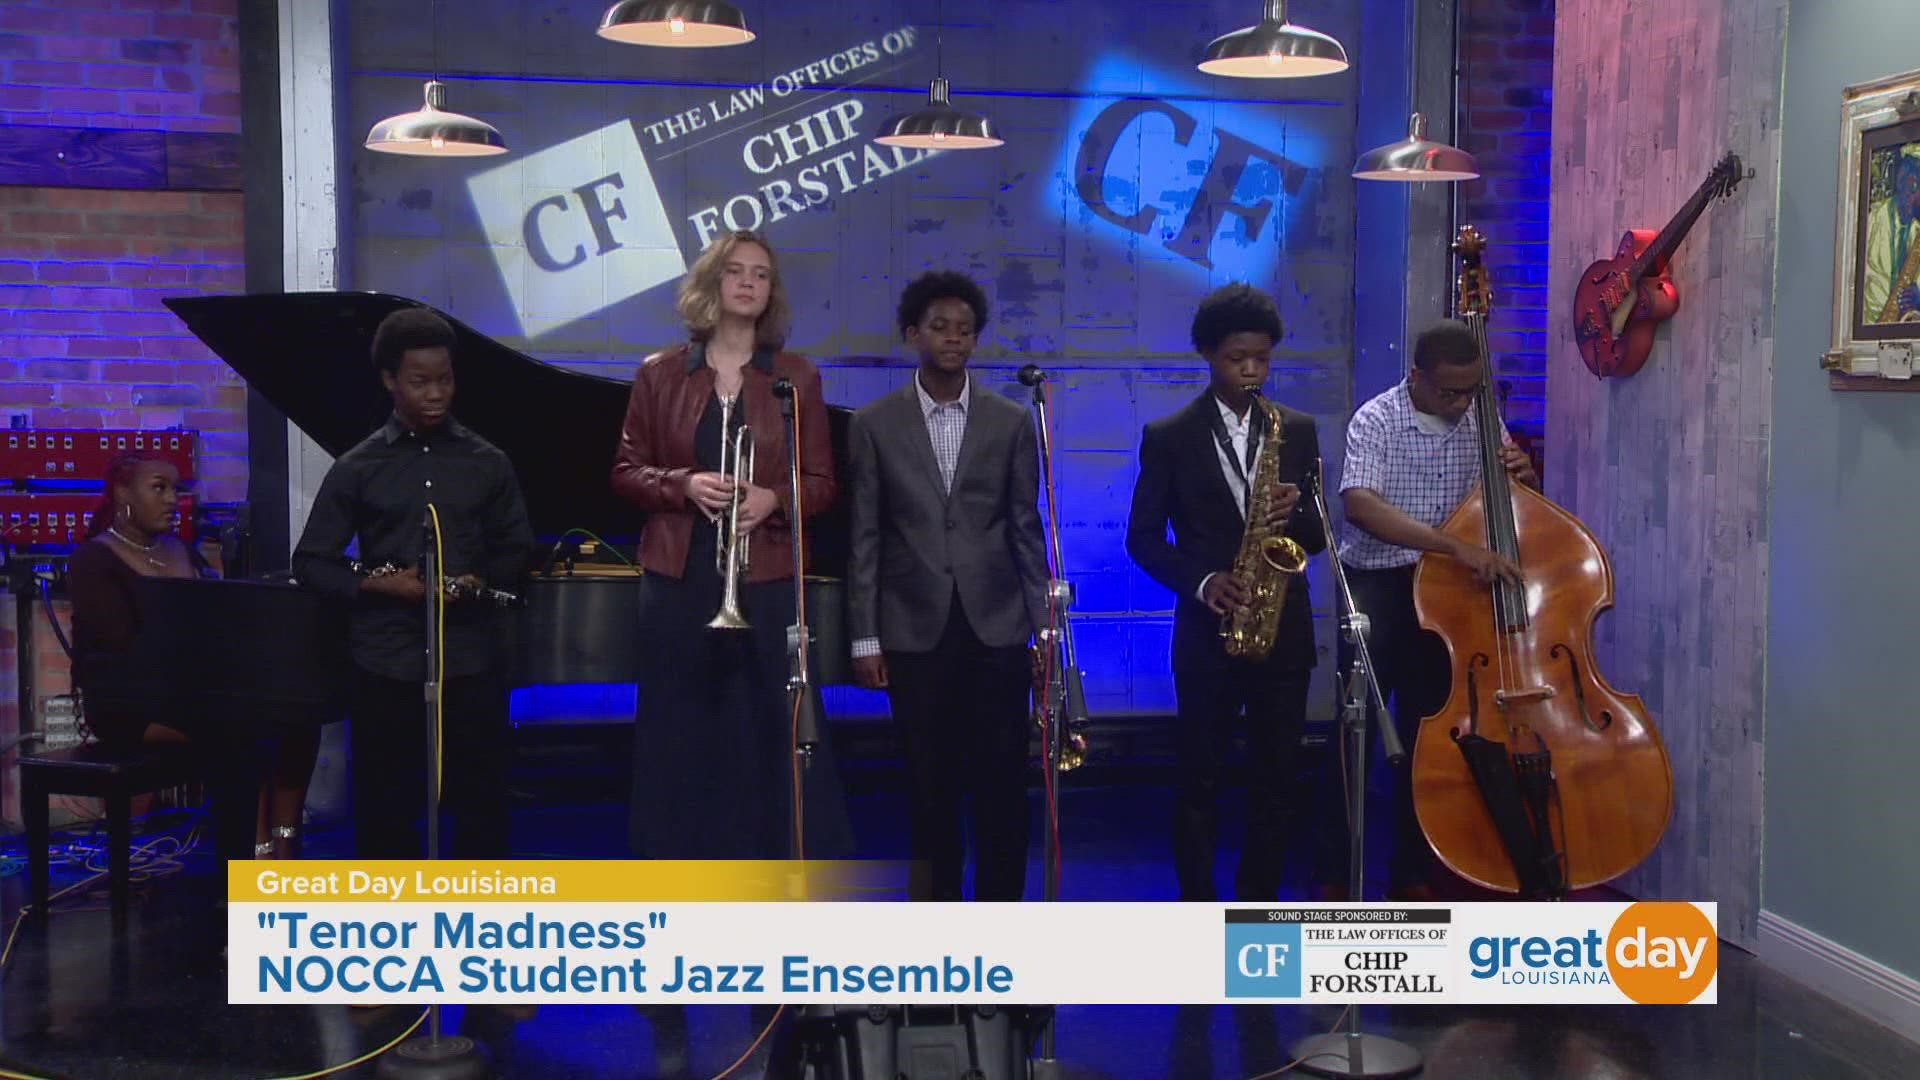 The New Orleans Center for Creative Arts jazz ensemble performed.